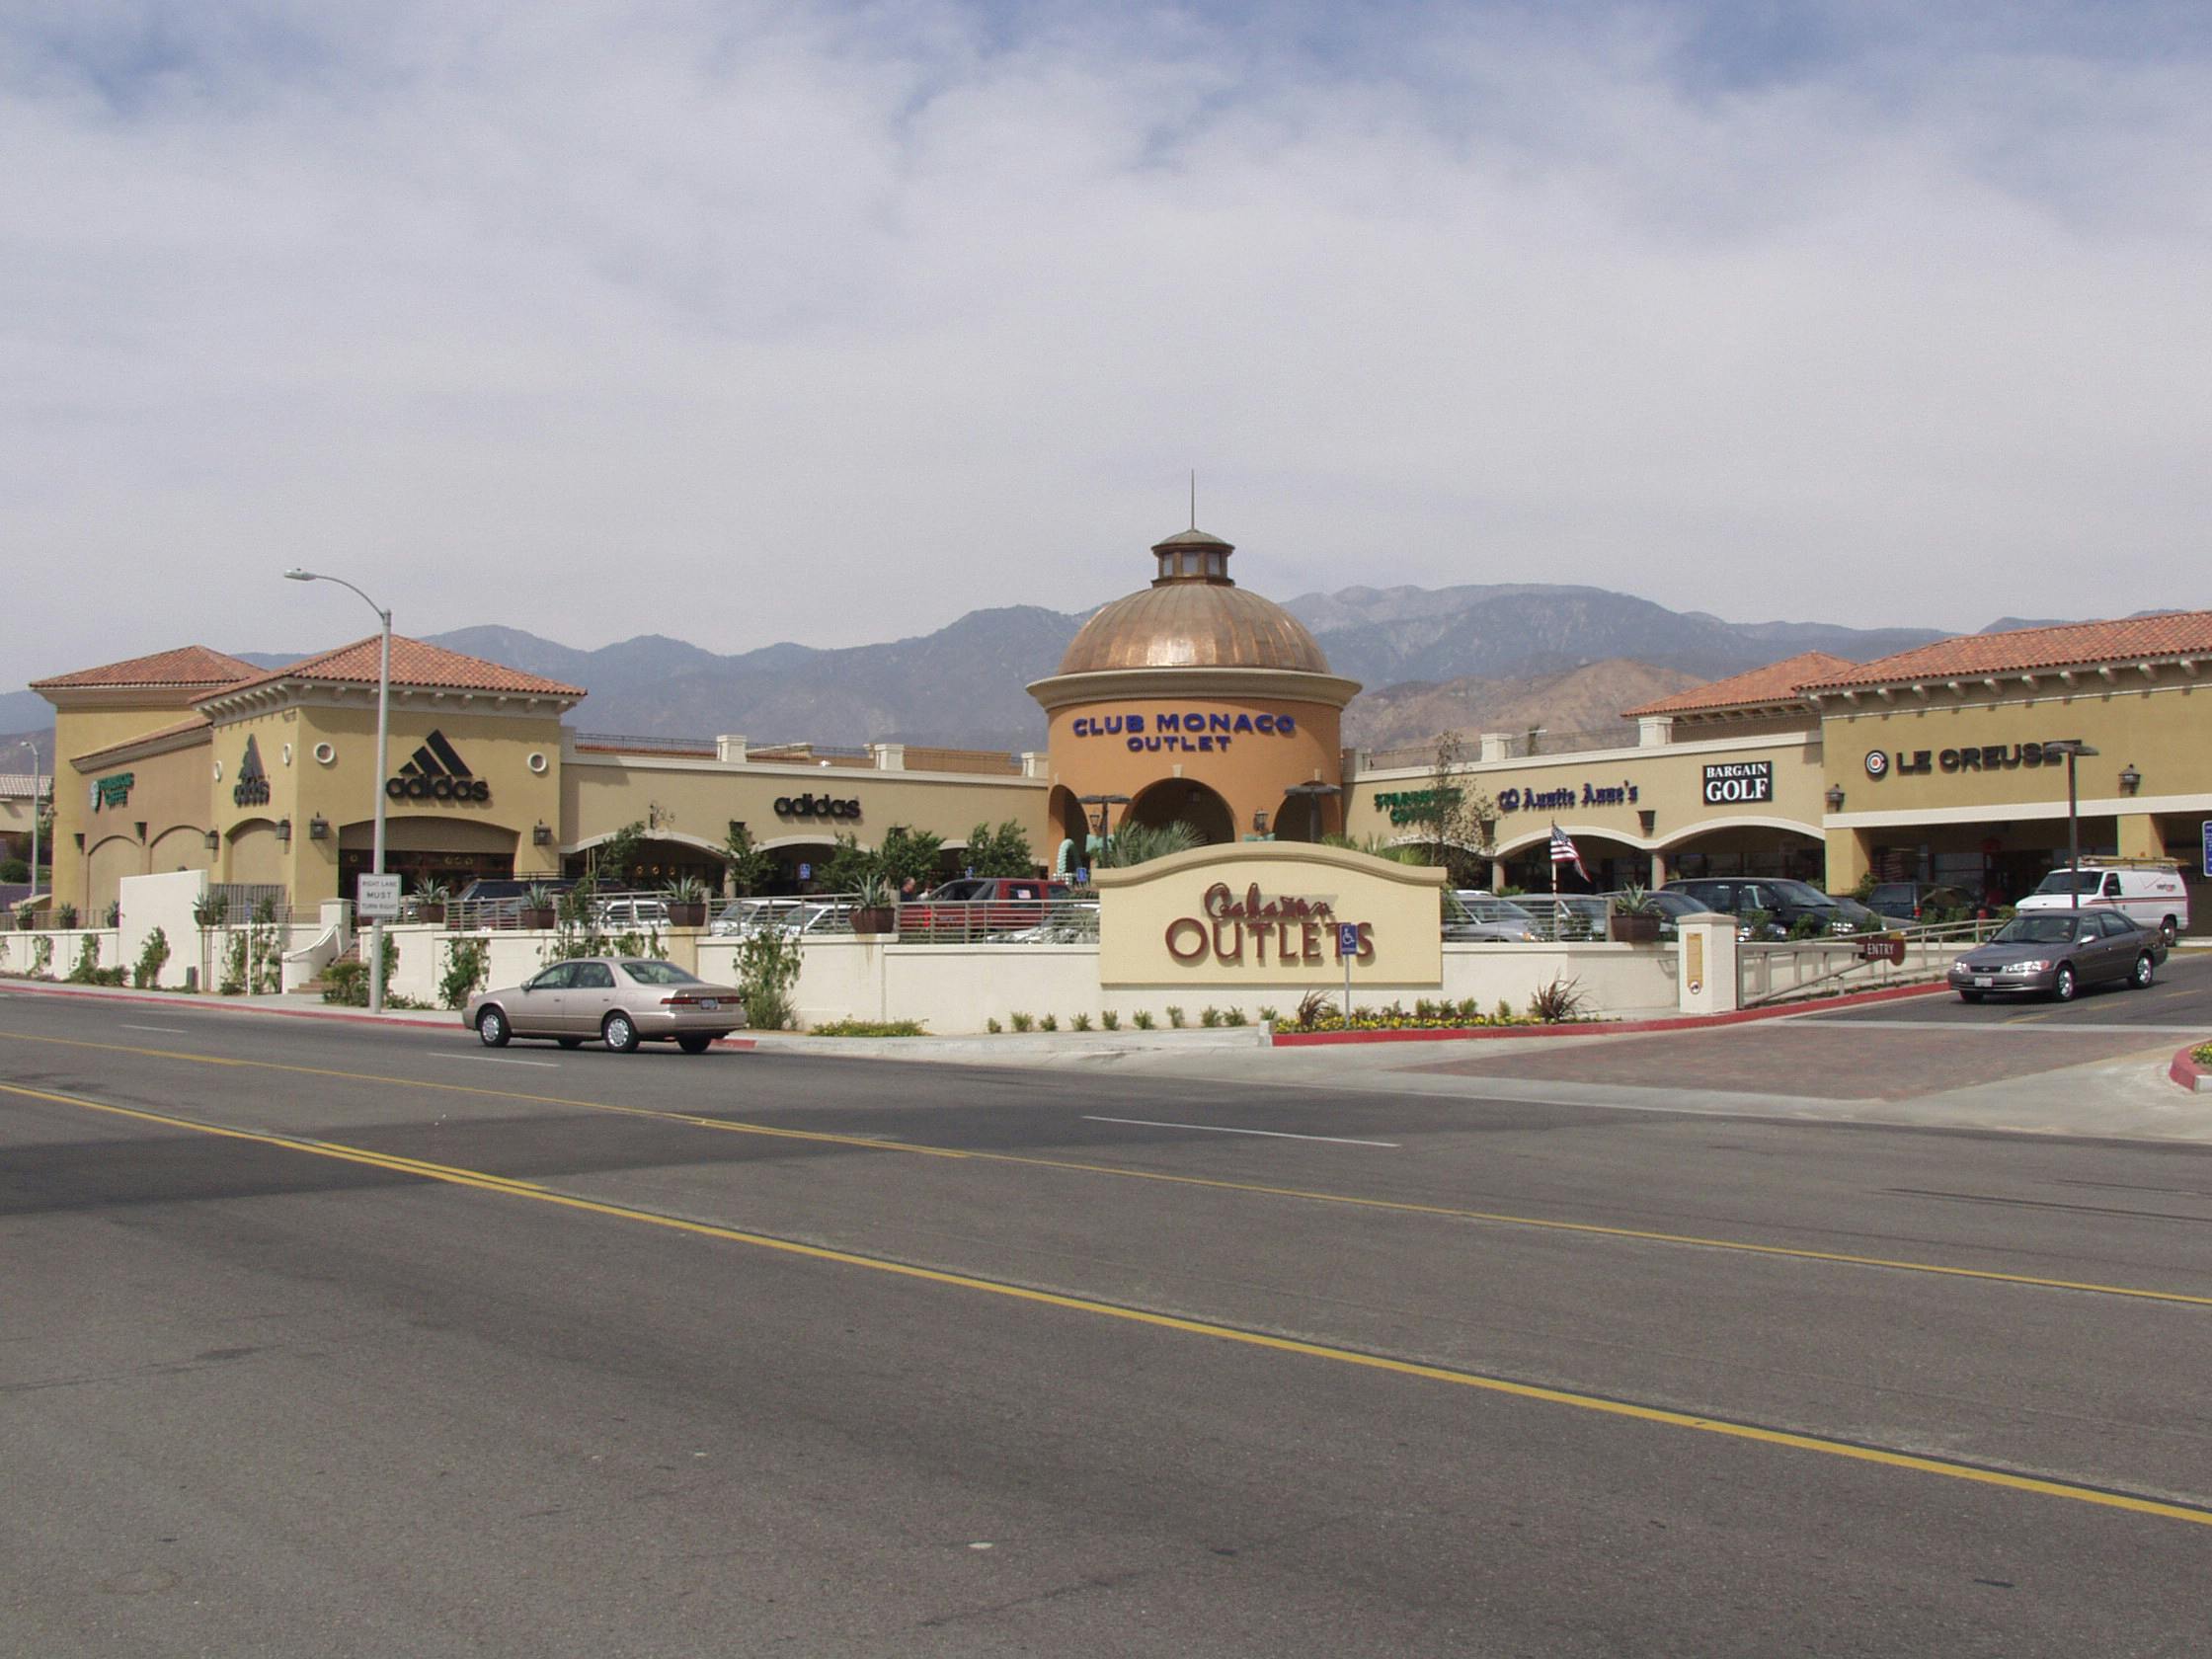 Cabazon Outlet Stores | KMA Architecture | Archinect